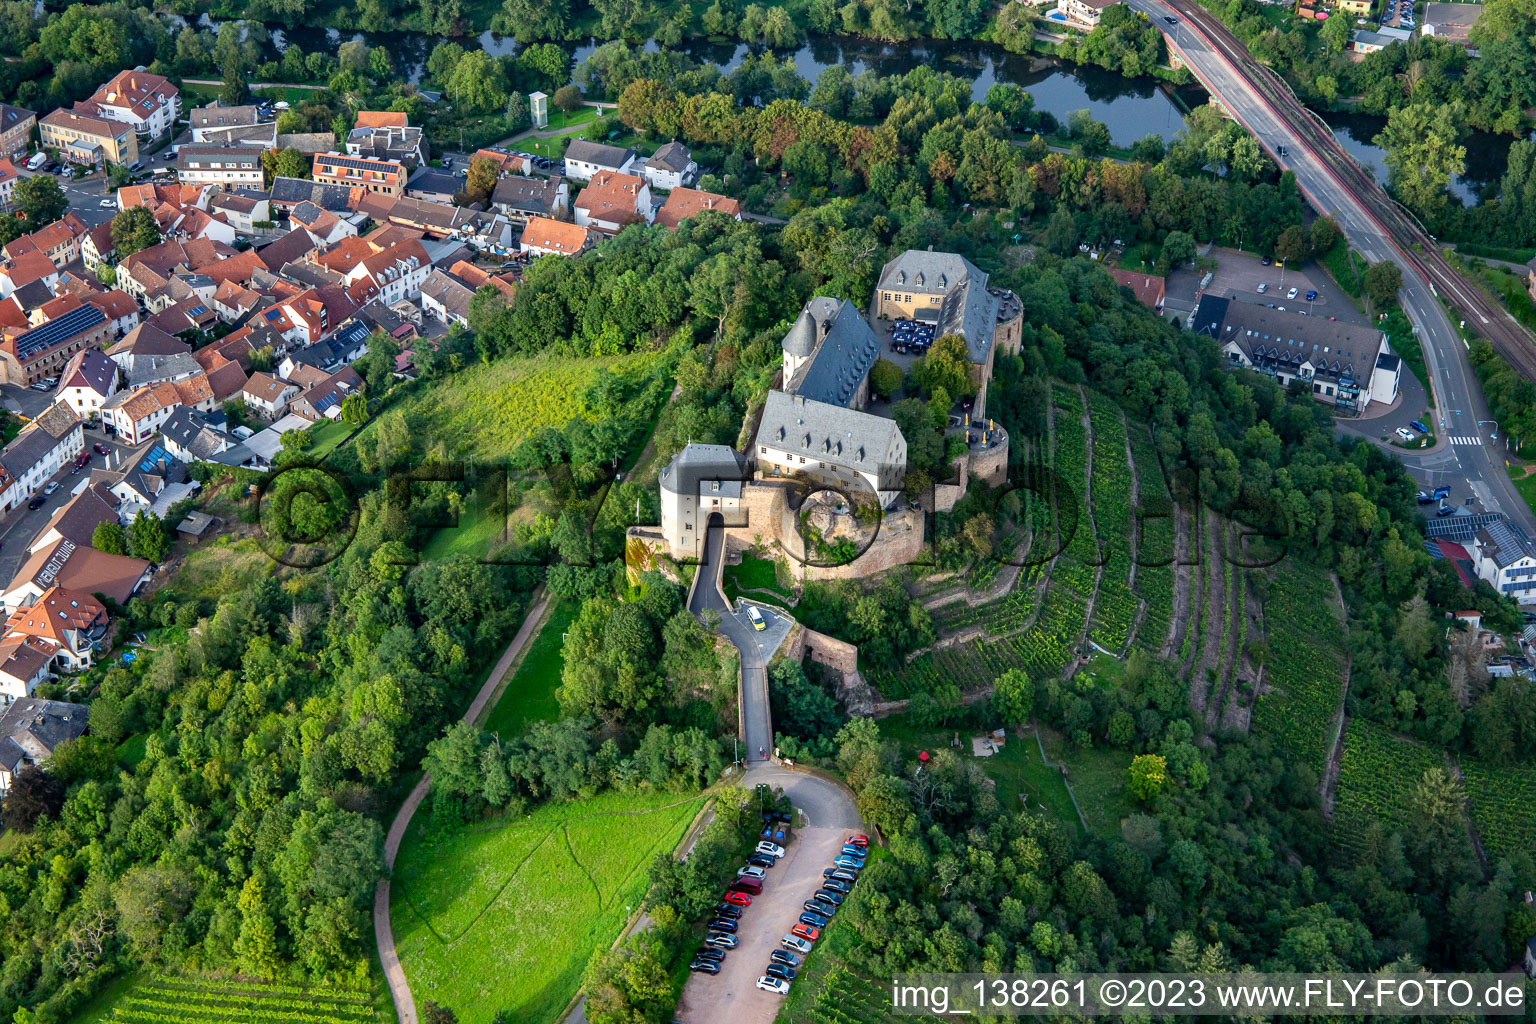 Castle Ebernburg / Protestant family holiday and educational center Ebernburg in the district Ebernburg in Bad Kreuznach in the state Rhineland-Palatinate, Germany from above